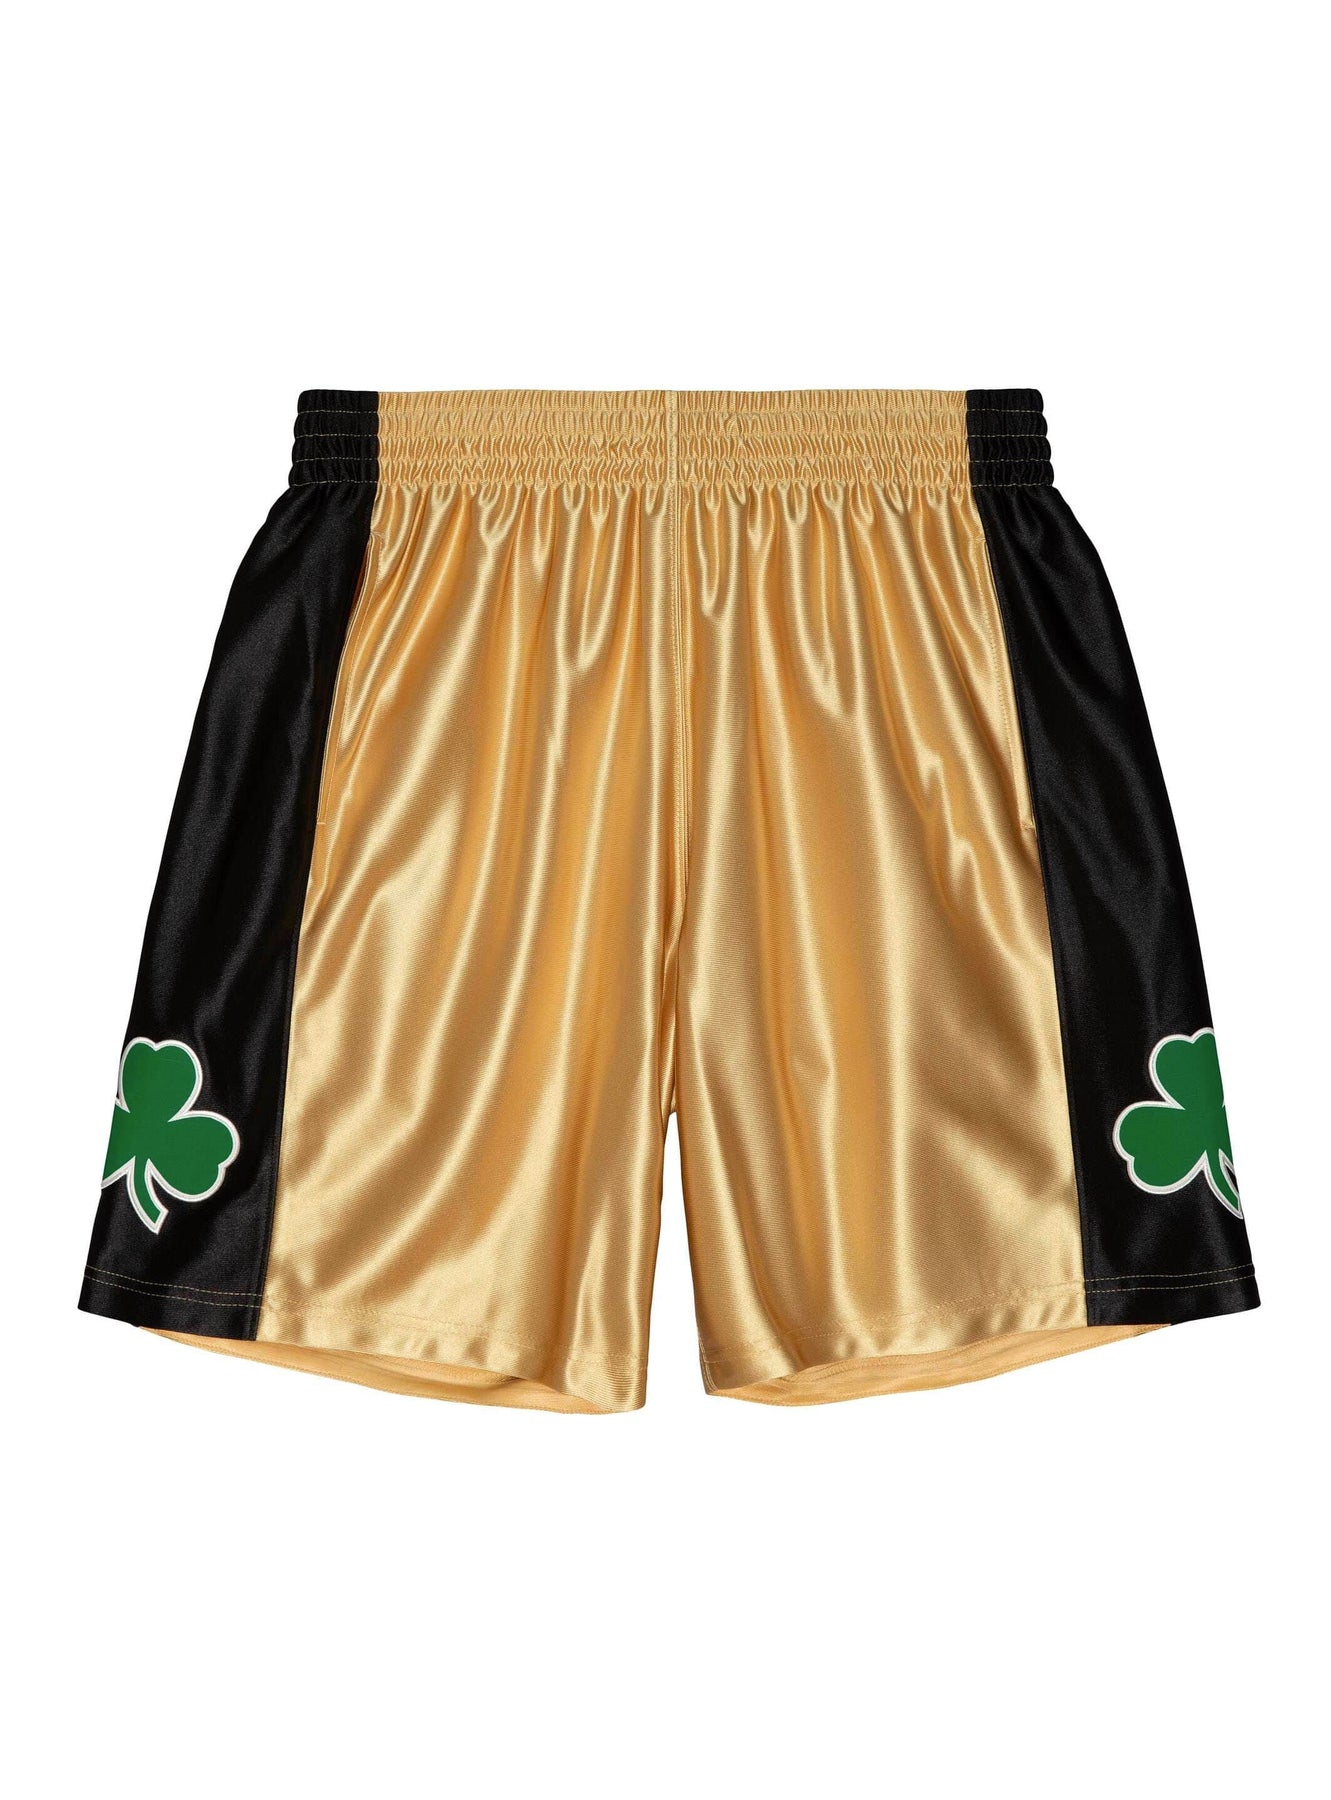 NBA Los Angeles Lakers 2009 75th Anniversary Gold Shorts – Seattle